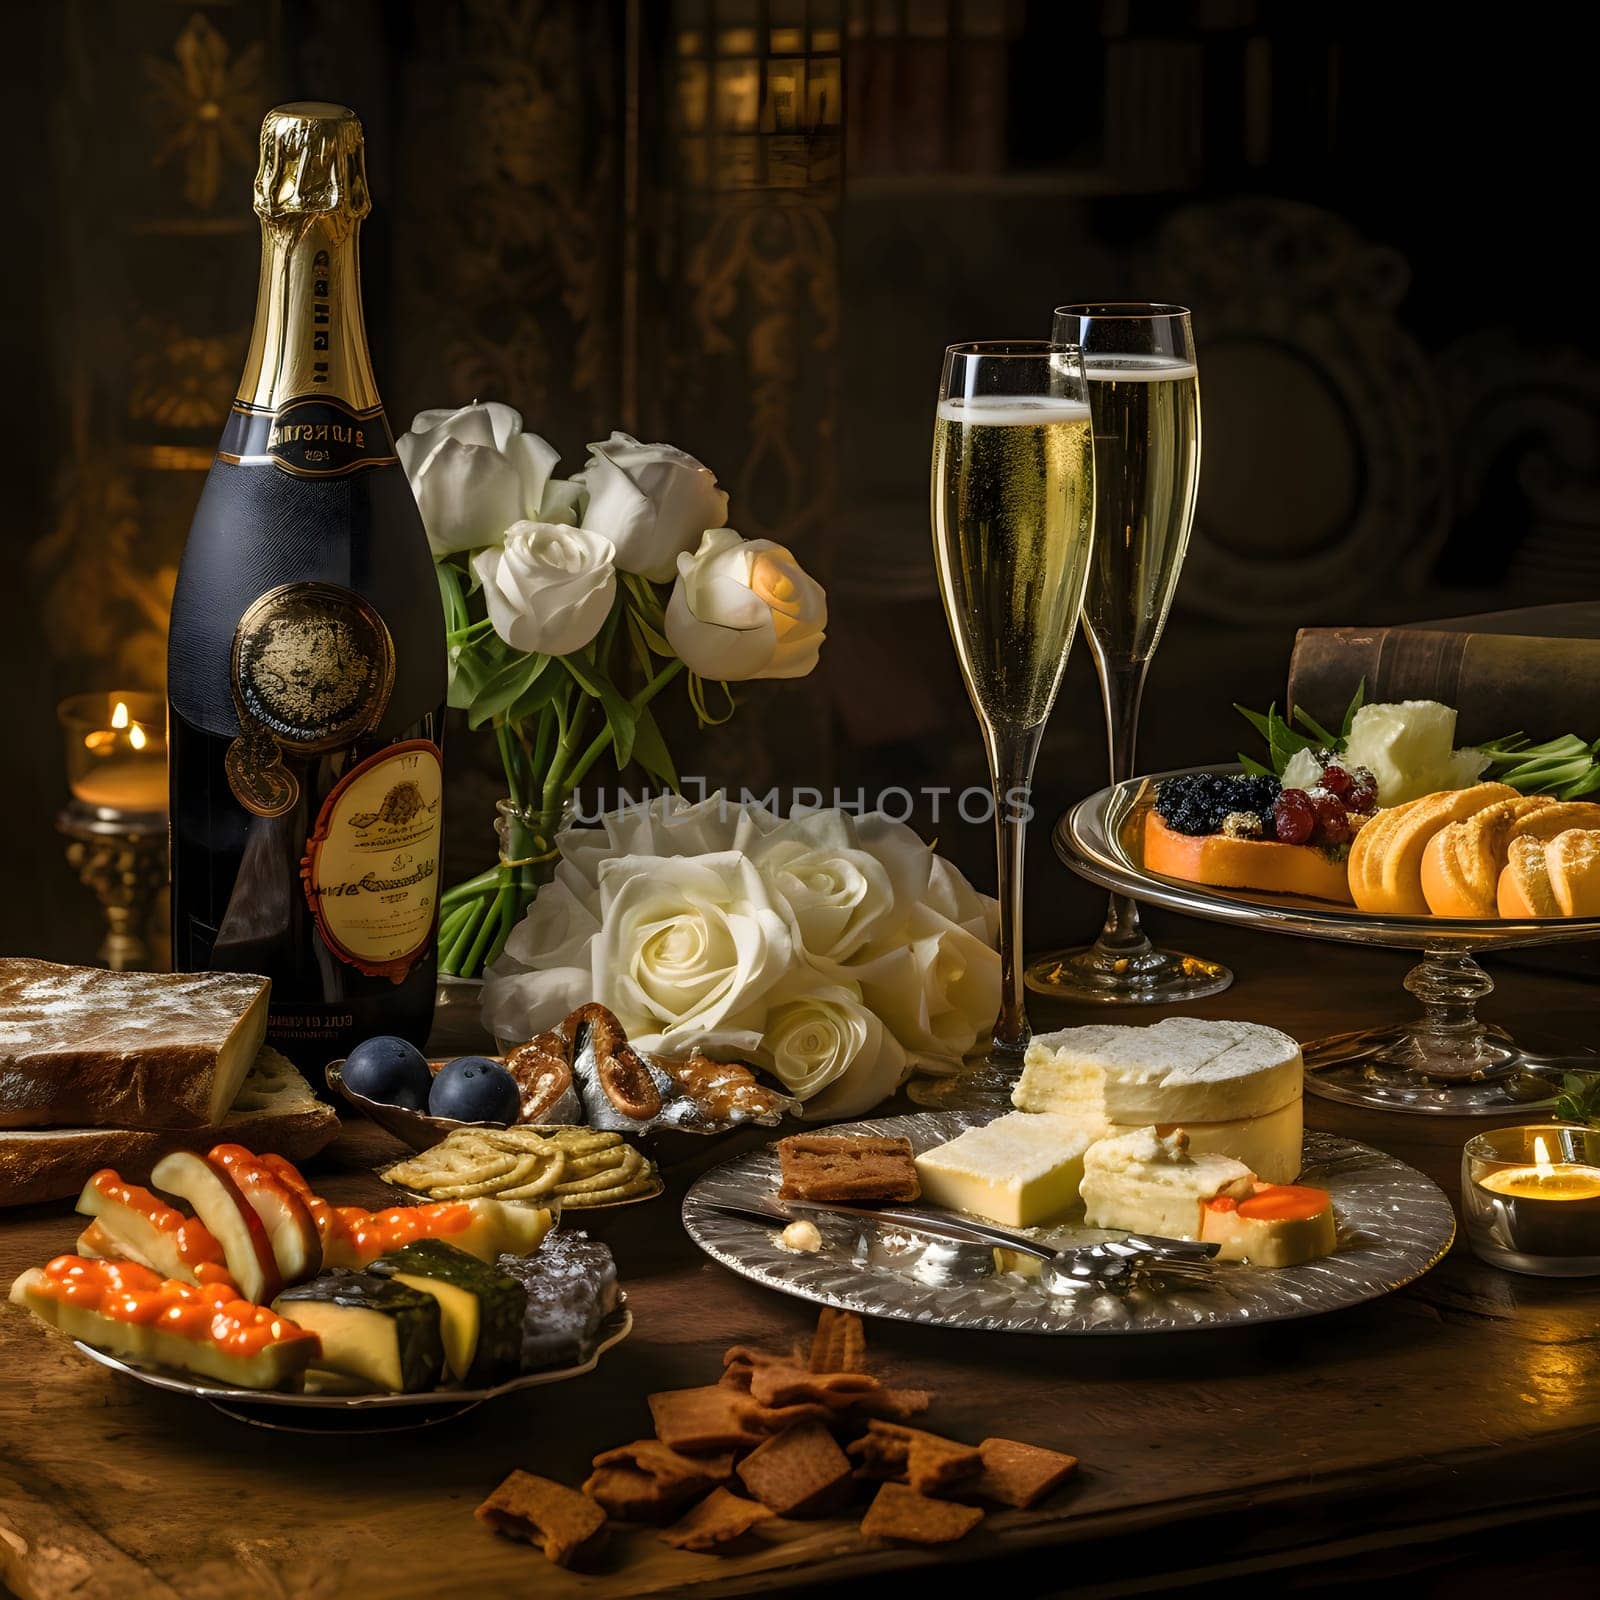 A richly set table, for a New Year's party: plates, glasses, champagne, candles, with a blurry bokeh effect in the background. New Year's celebrations. A time of celebration and resolutions.